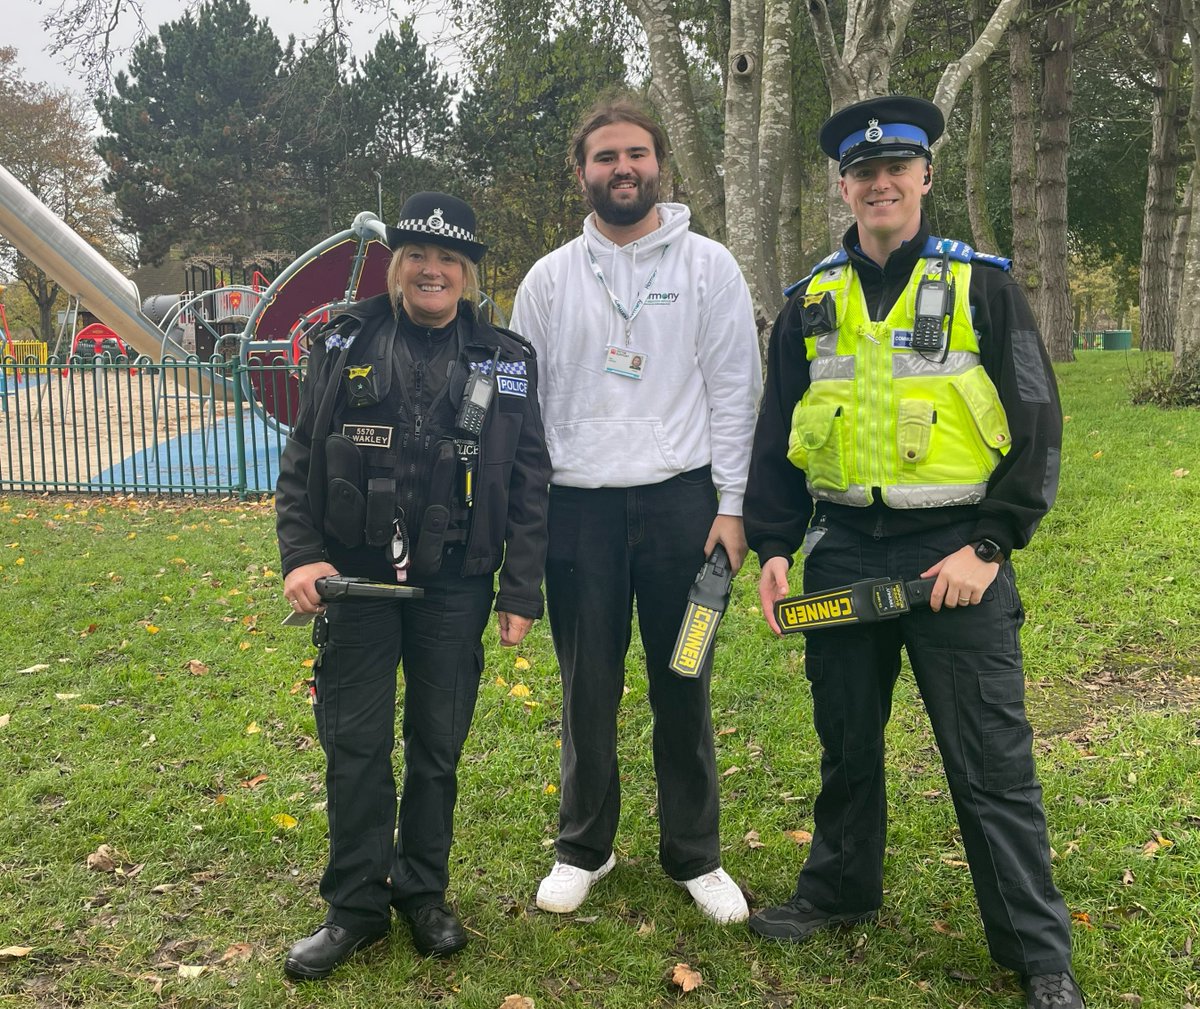 Tamworth NPT and ASB Harmony have completed a sweep of the Castle Grounds area today, including carparks & Stryker's as part of our week of action to #DitchTheBlade. 
By using metal detector scanners, we found various metallic objects in undergrowth, but thankfully NO blades!